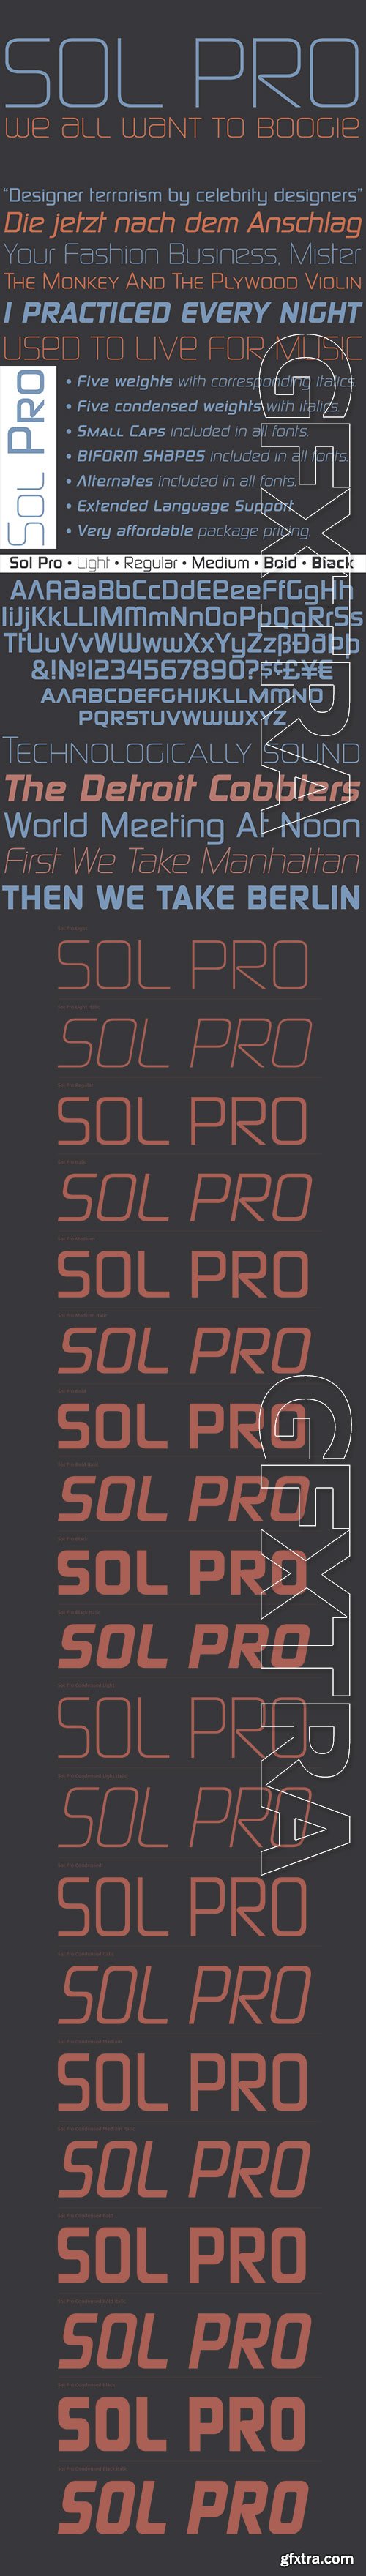 Sol Pro - Prominent Forefathers & Strong Influencers 20xOTF $200